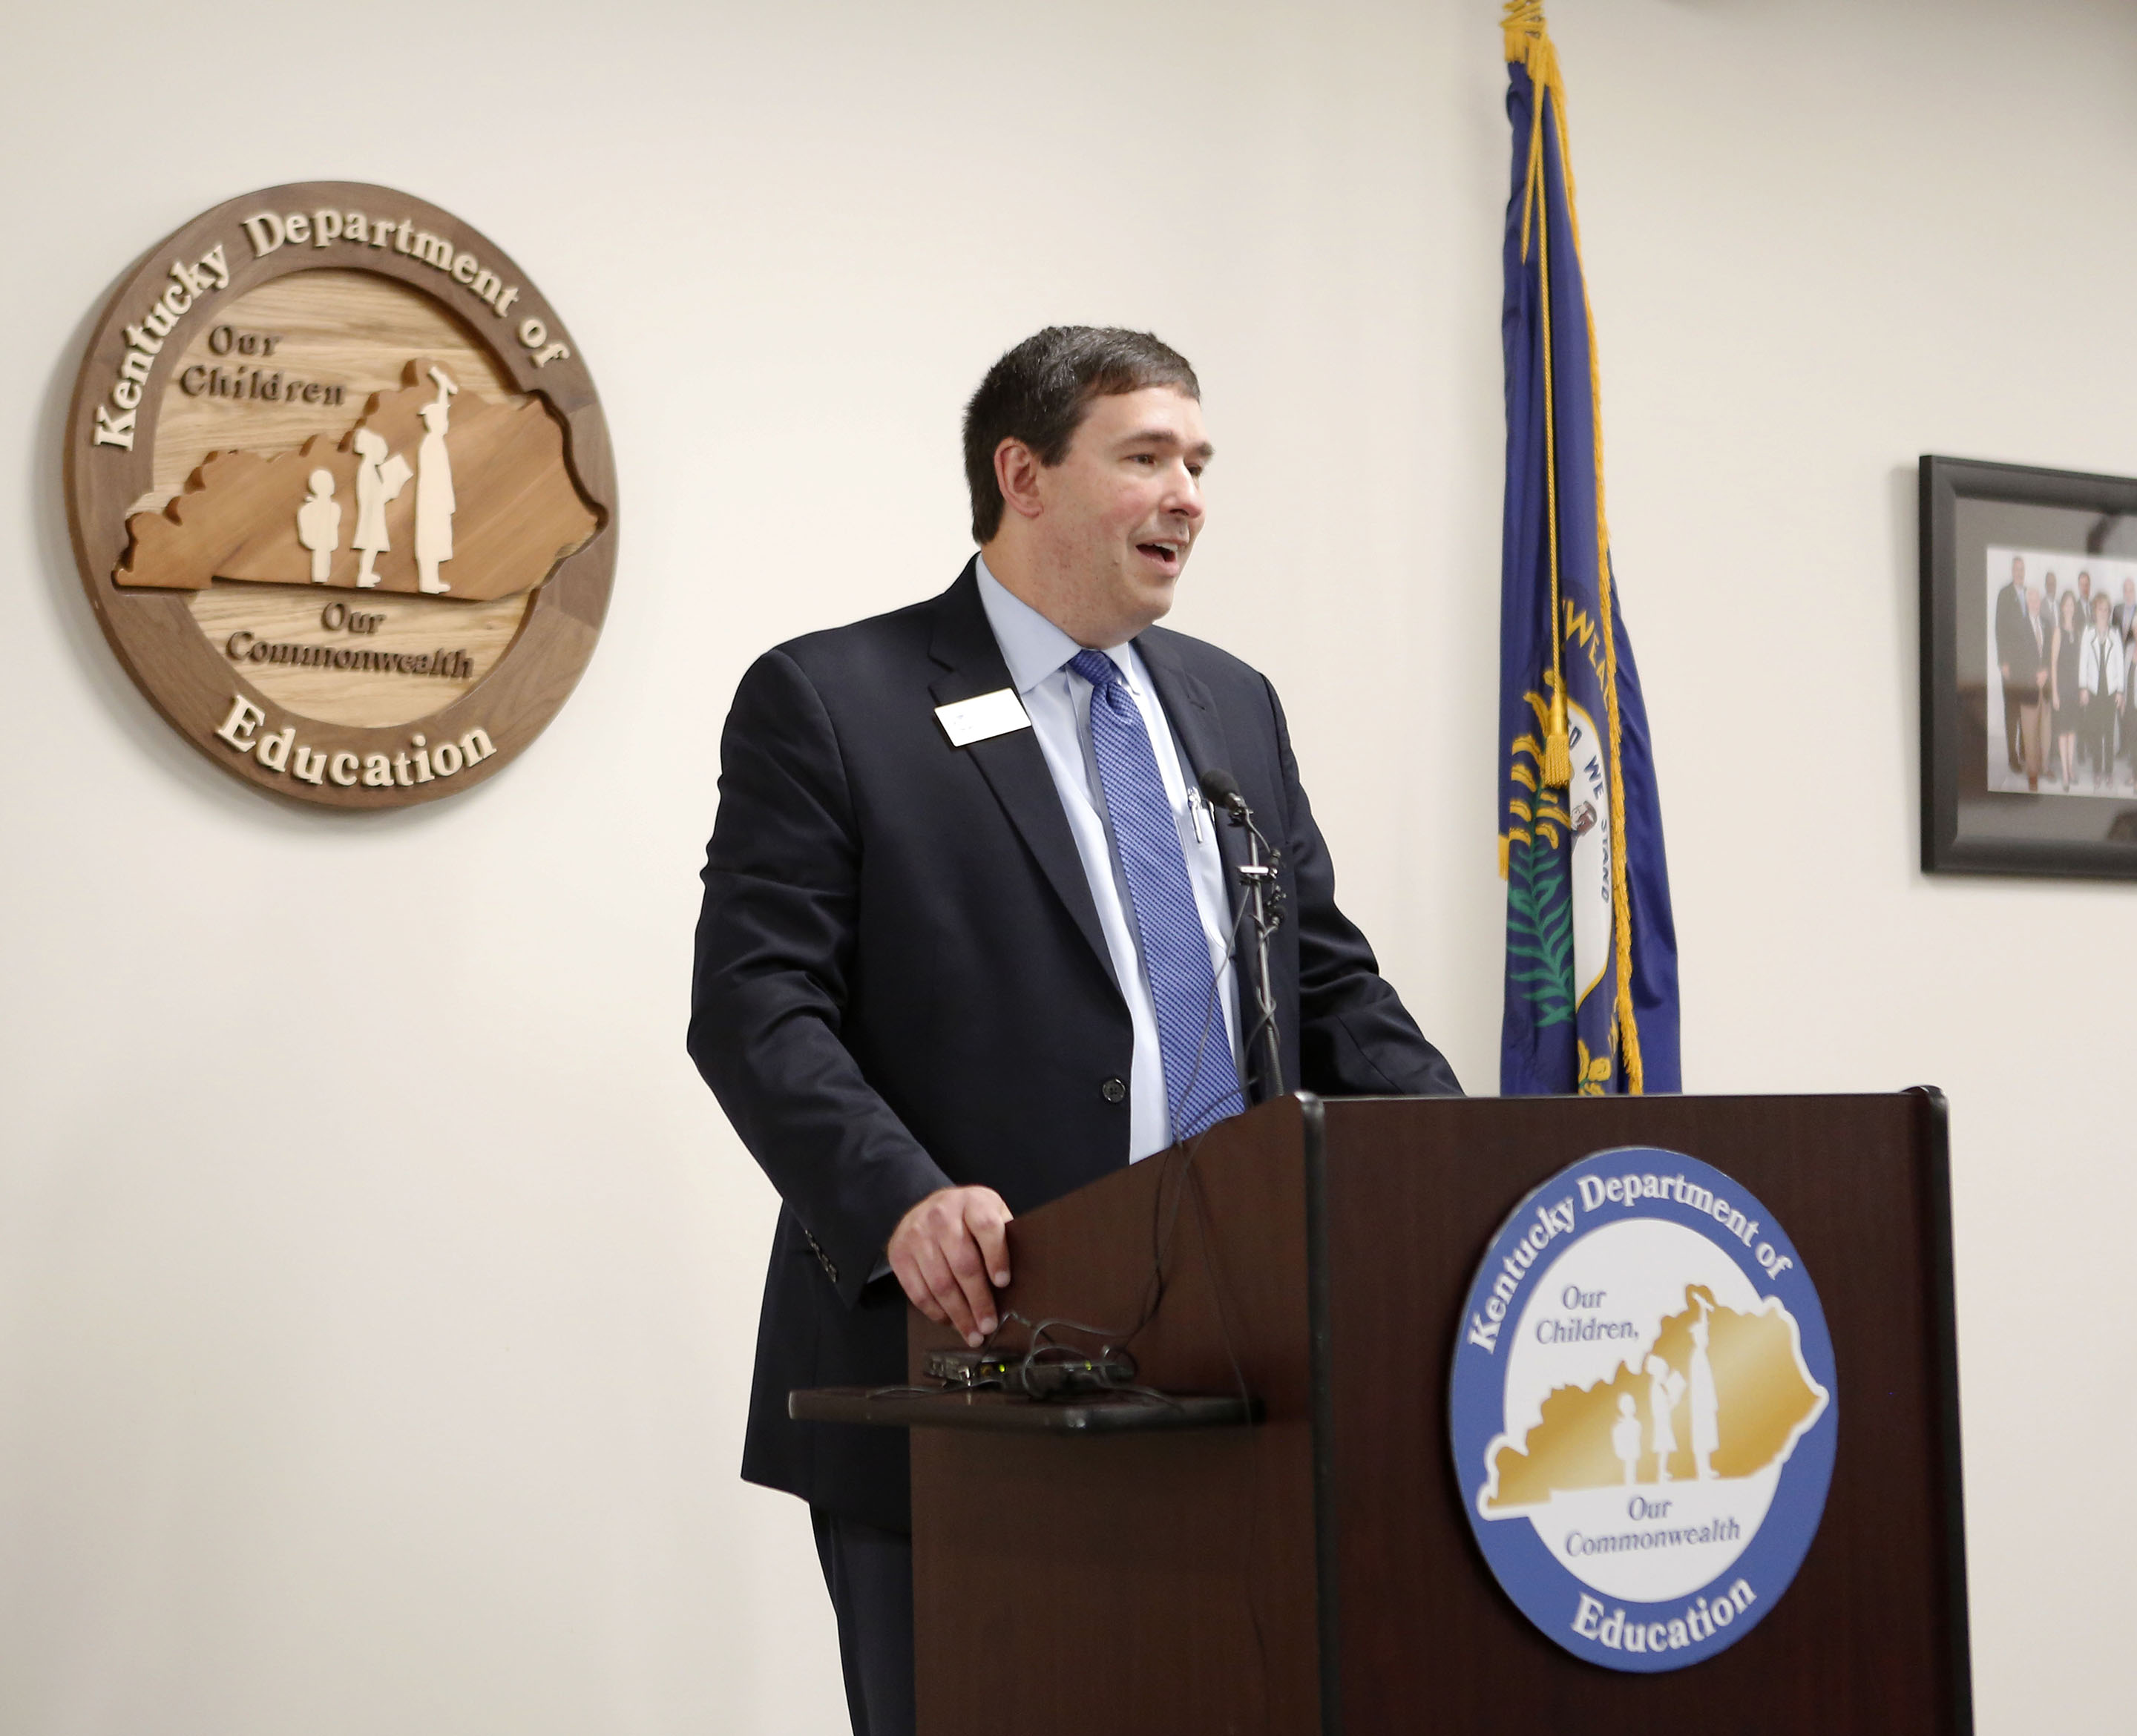 Kentucky Commissioner of Education Stephen Pruitt speaks at a May 15 news conference at which he detailed the schedule for review and revision of Kentucky’s Academic Standards. English/language arts and mathematics standards are currently online and open for public comment. Current standards will remain in place until new or revised standards are adopted. Photo by Mike Marsee, May 15, 2017